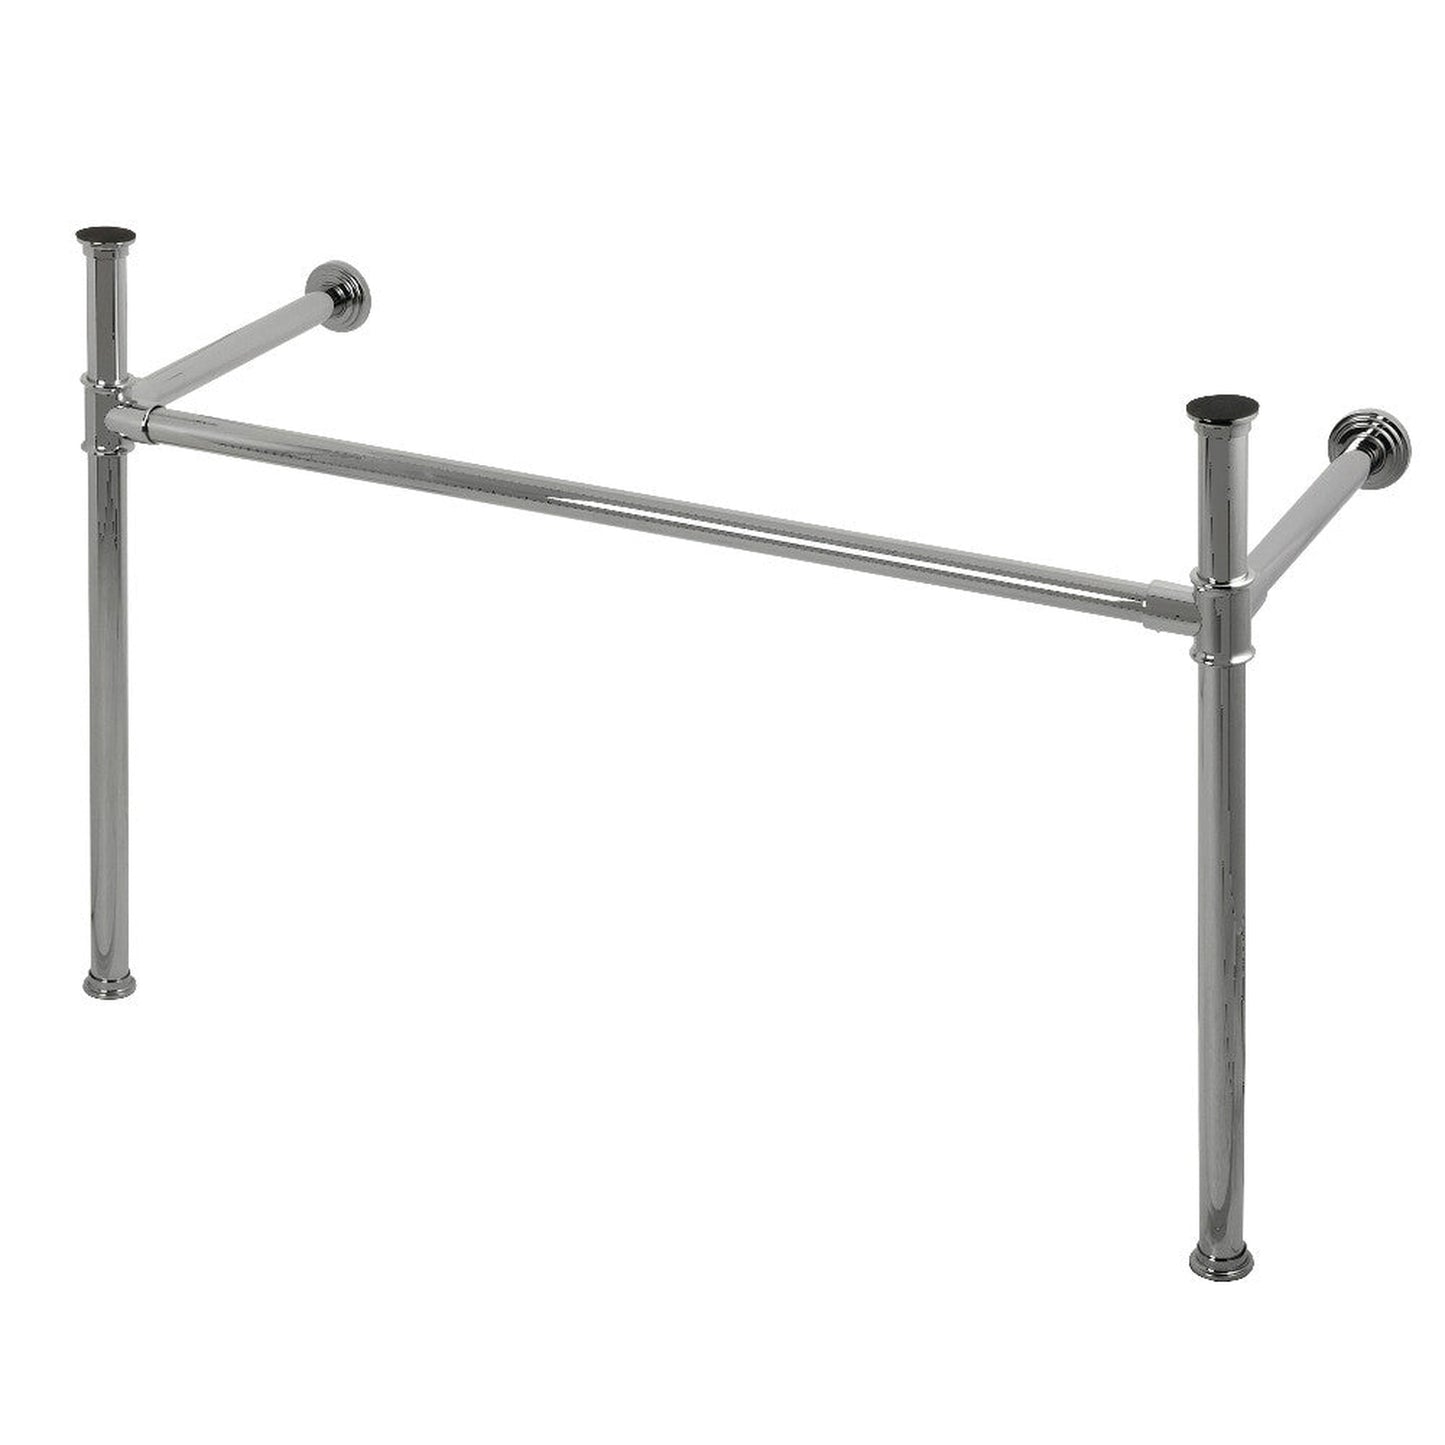 Kingston Brass VPB14881 Imperial Stainless Steel Console Legs, Polished Chrome